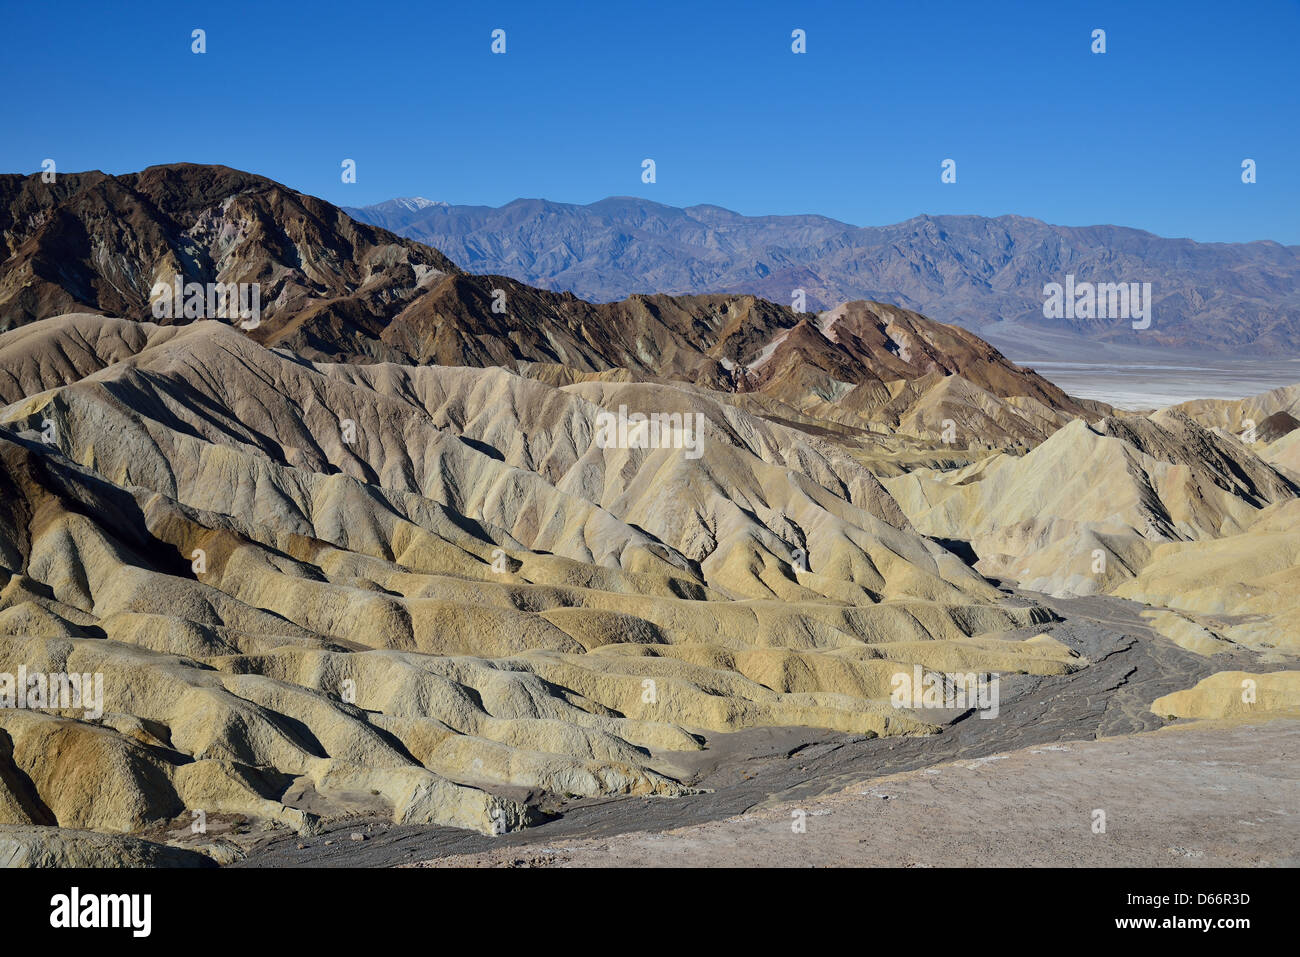 View of dry erosional ravines at the Zabriskie Point. Death Valley National Park, California, USA. Stock Photo